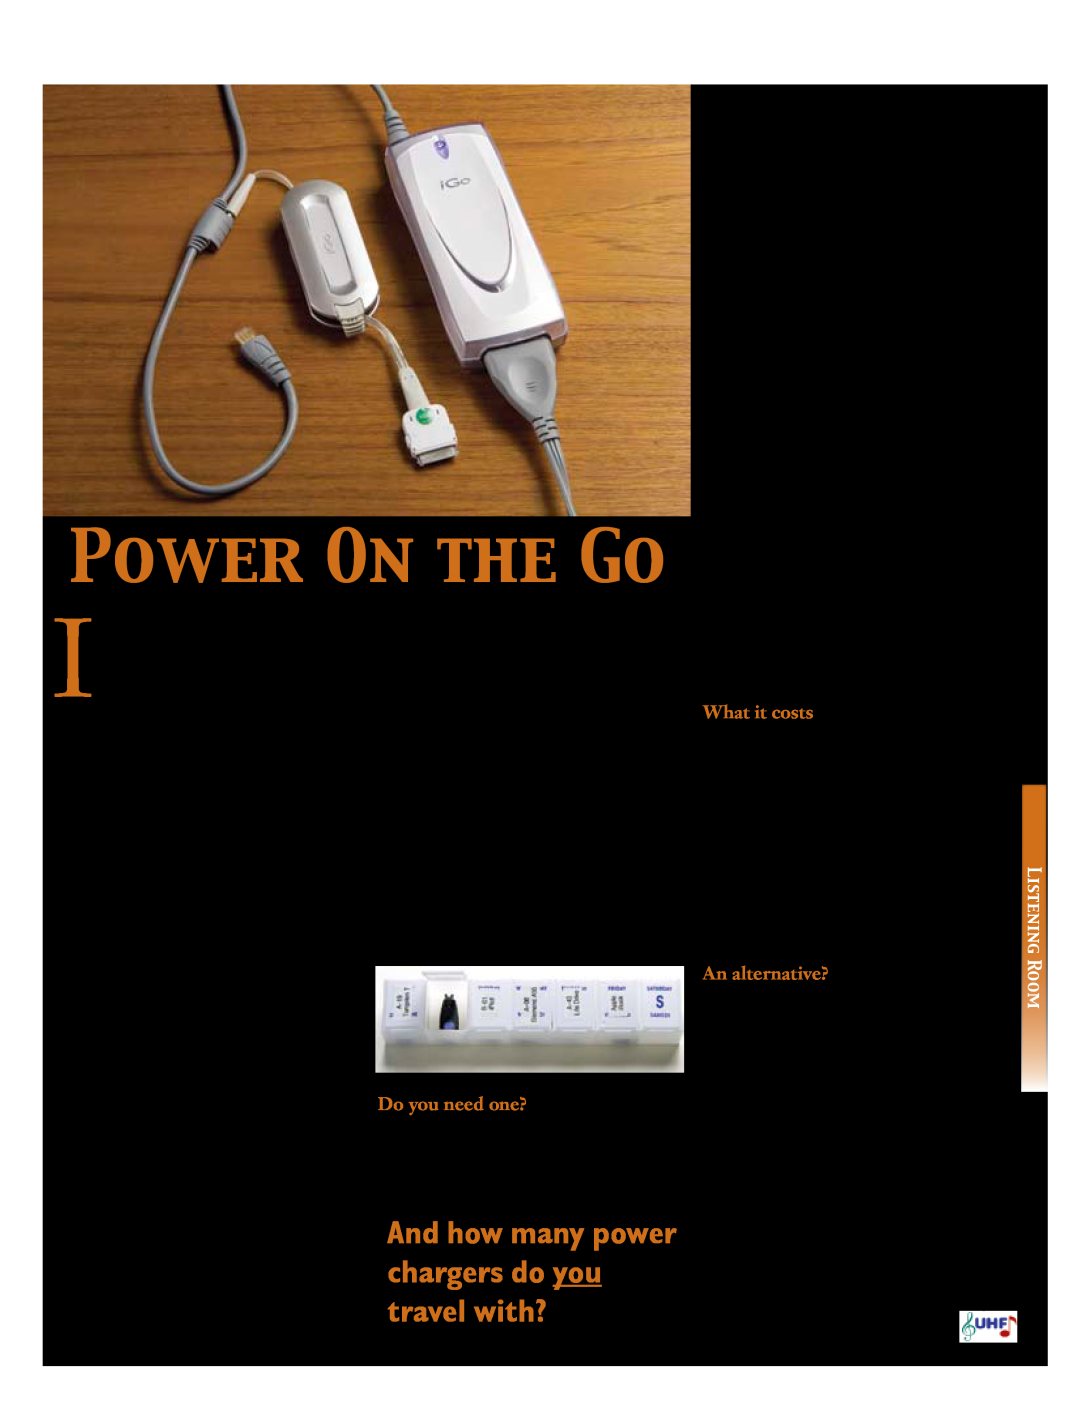 Koss 76 Power On The Go, And how many power chargers do you travel with?, Do you need one?, What it costs, An alternative? 